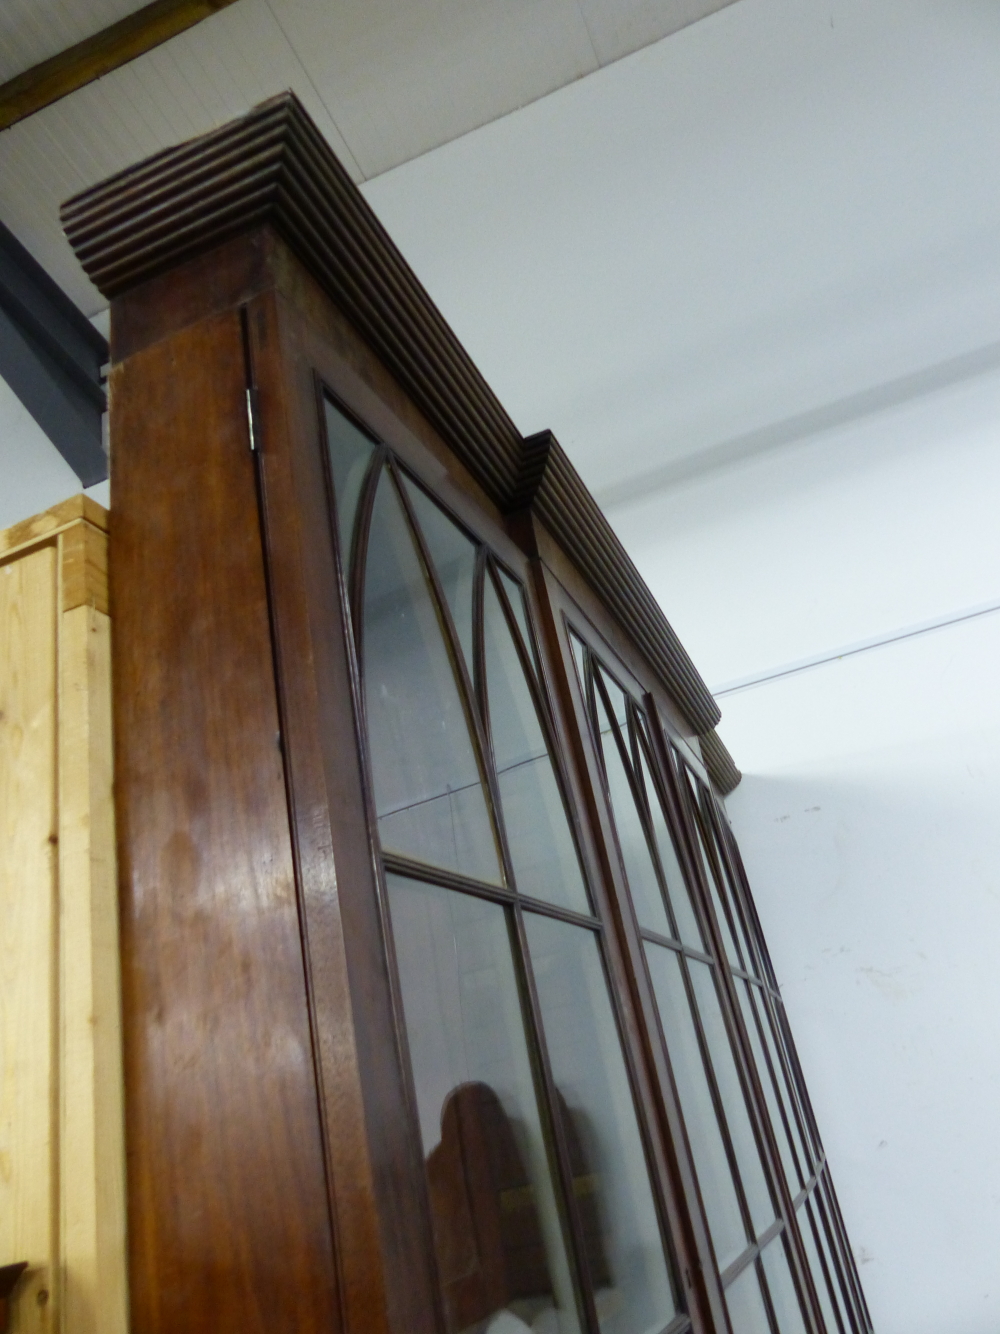 A GEO.III. MAHOGANY SHALLOW BOOKCASE OR APOTHECARY DISPLAY CABINET WITH FOUR GLAZED DOORS OVER PANEL - Image 6 of 6